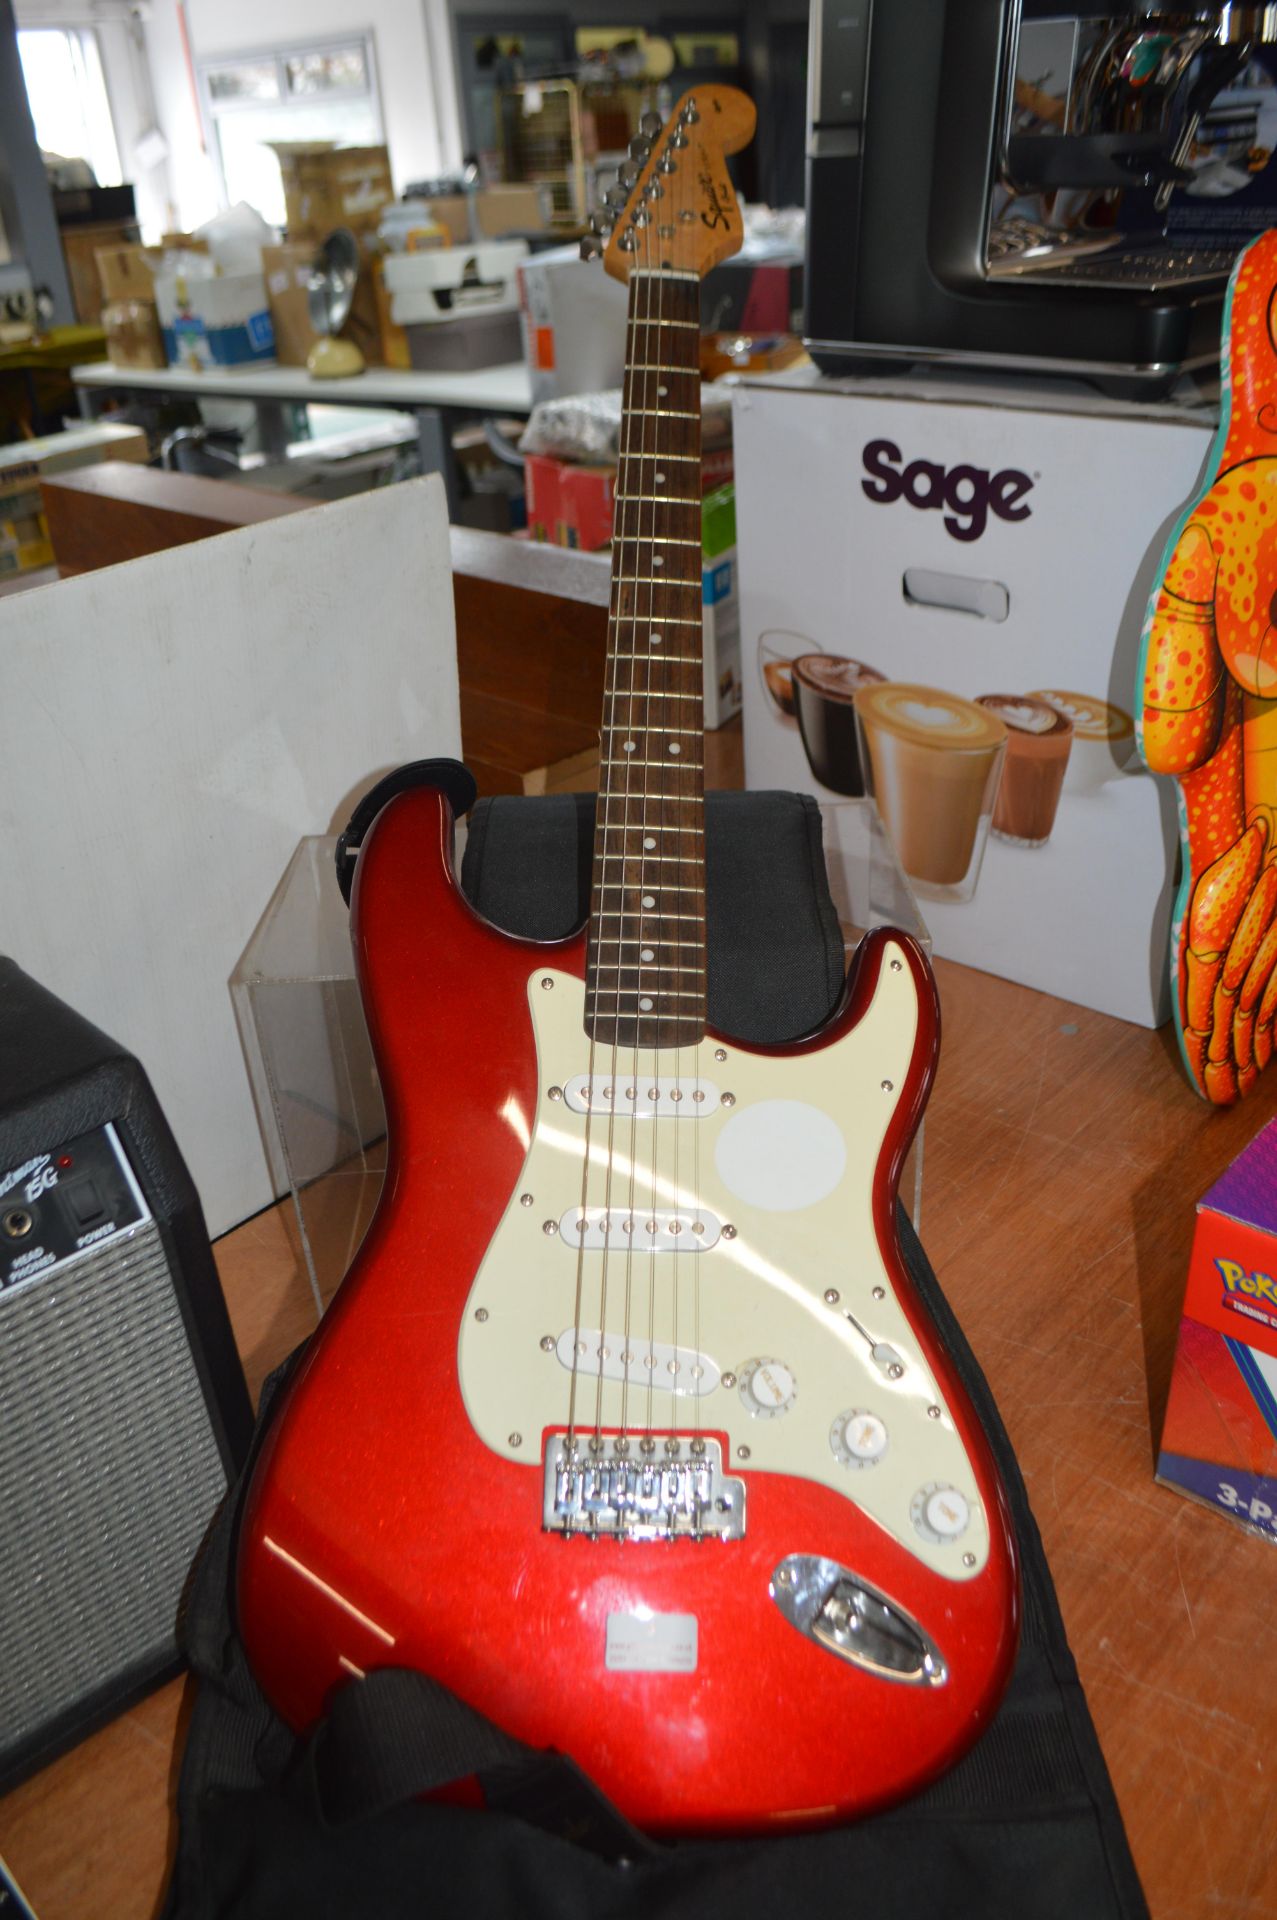 Fender Squier Stratocaster Electric Guitar plus Frontman 15G Amplifier, and Sing Books - Image 2 of 4